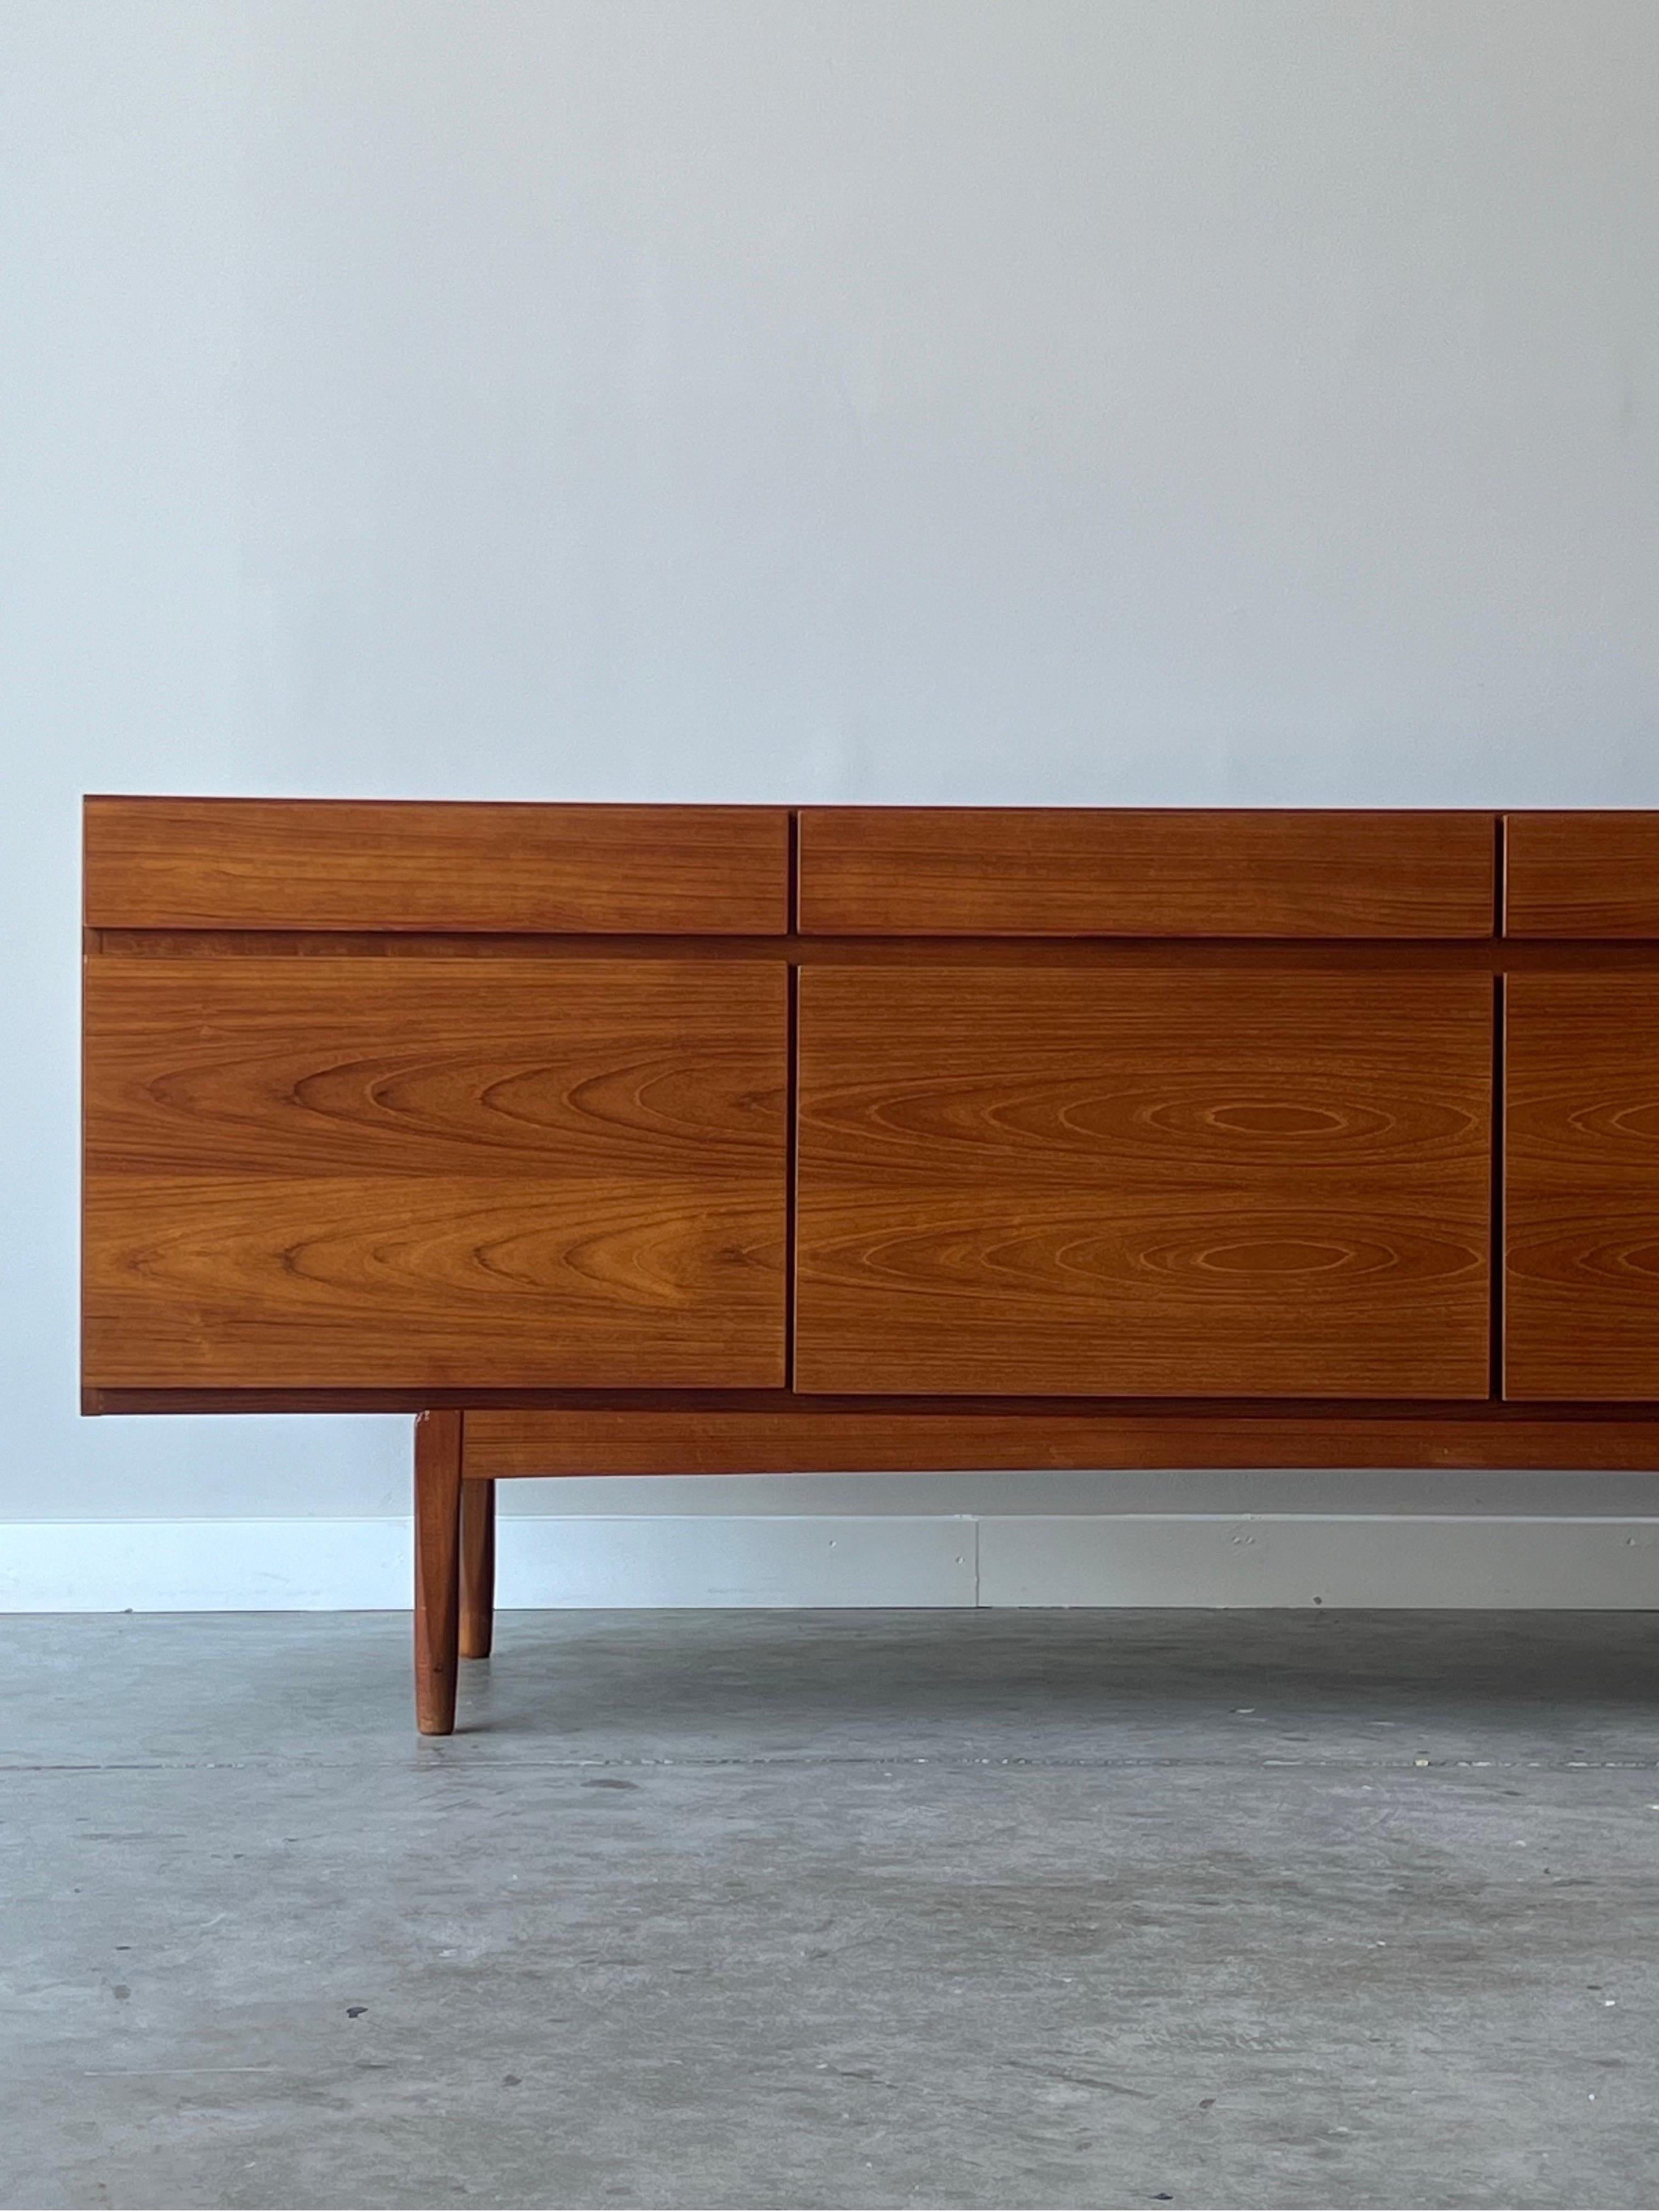 Large mid-century teak sideboard or credenza. This model FA-66 credenza was designed by Ib Kofod Larsen for Faarup Møbelfabrik, circa 1960s. Quintessentially Danish streamlined design with gorgeous book-matched teak. Extremely versatile piece as it